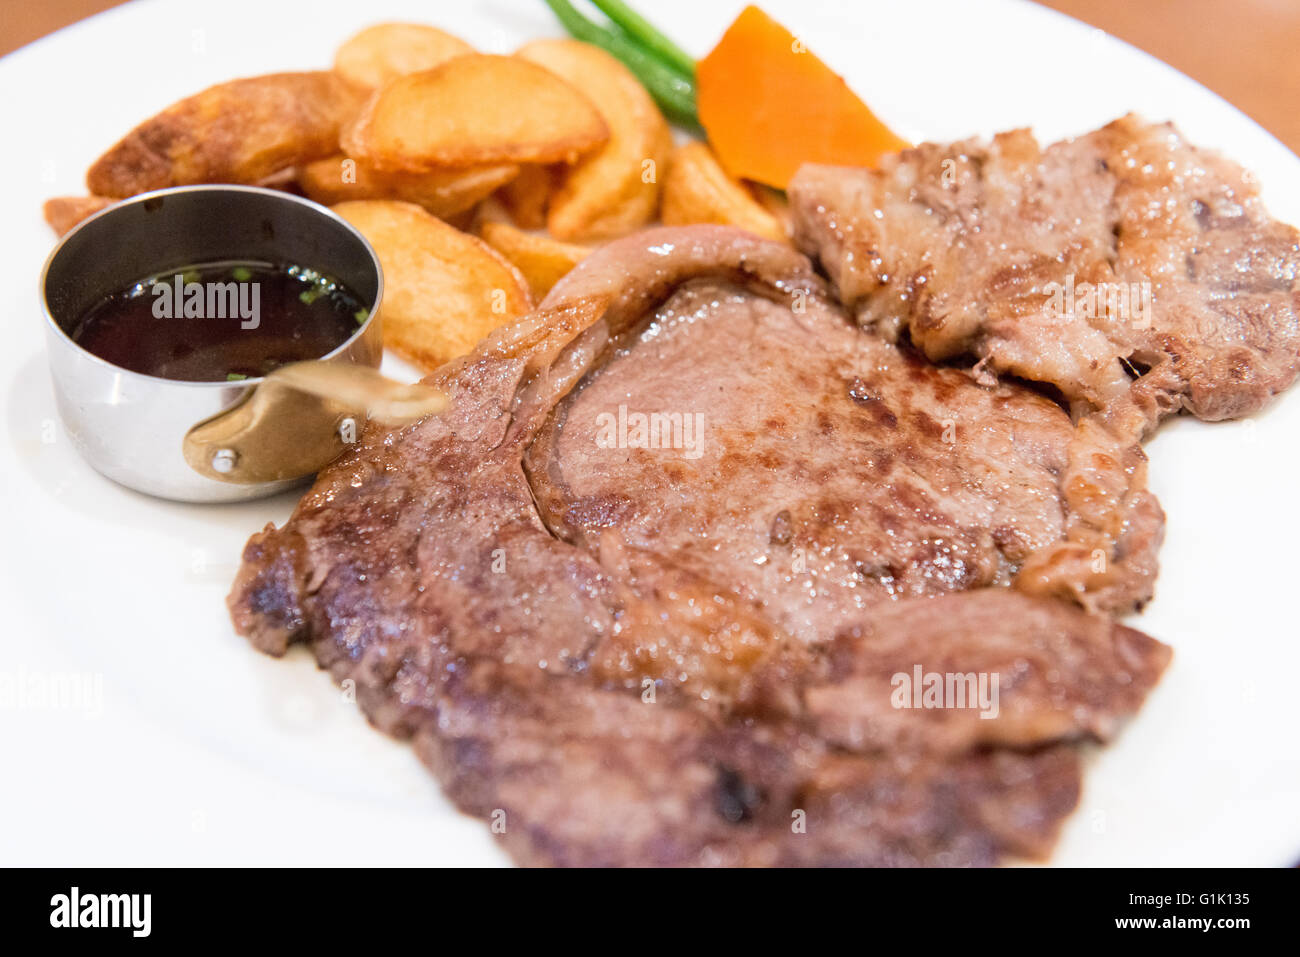 A large portion of beef steak and chips on plate Stock Photo